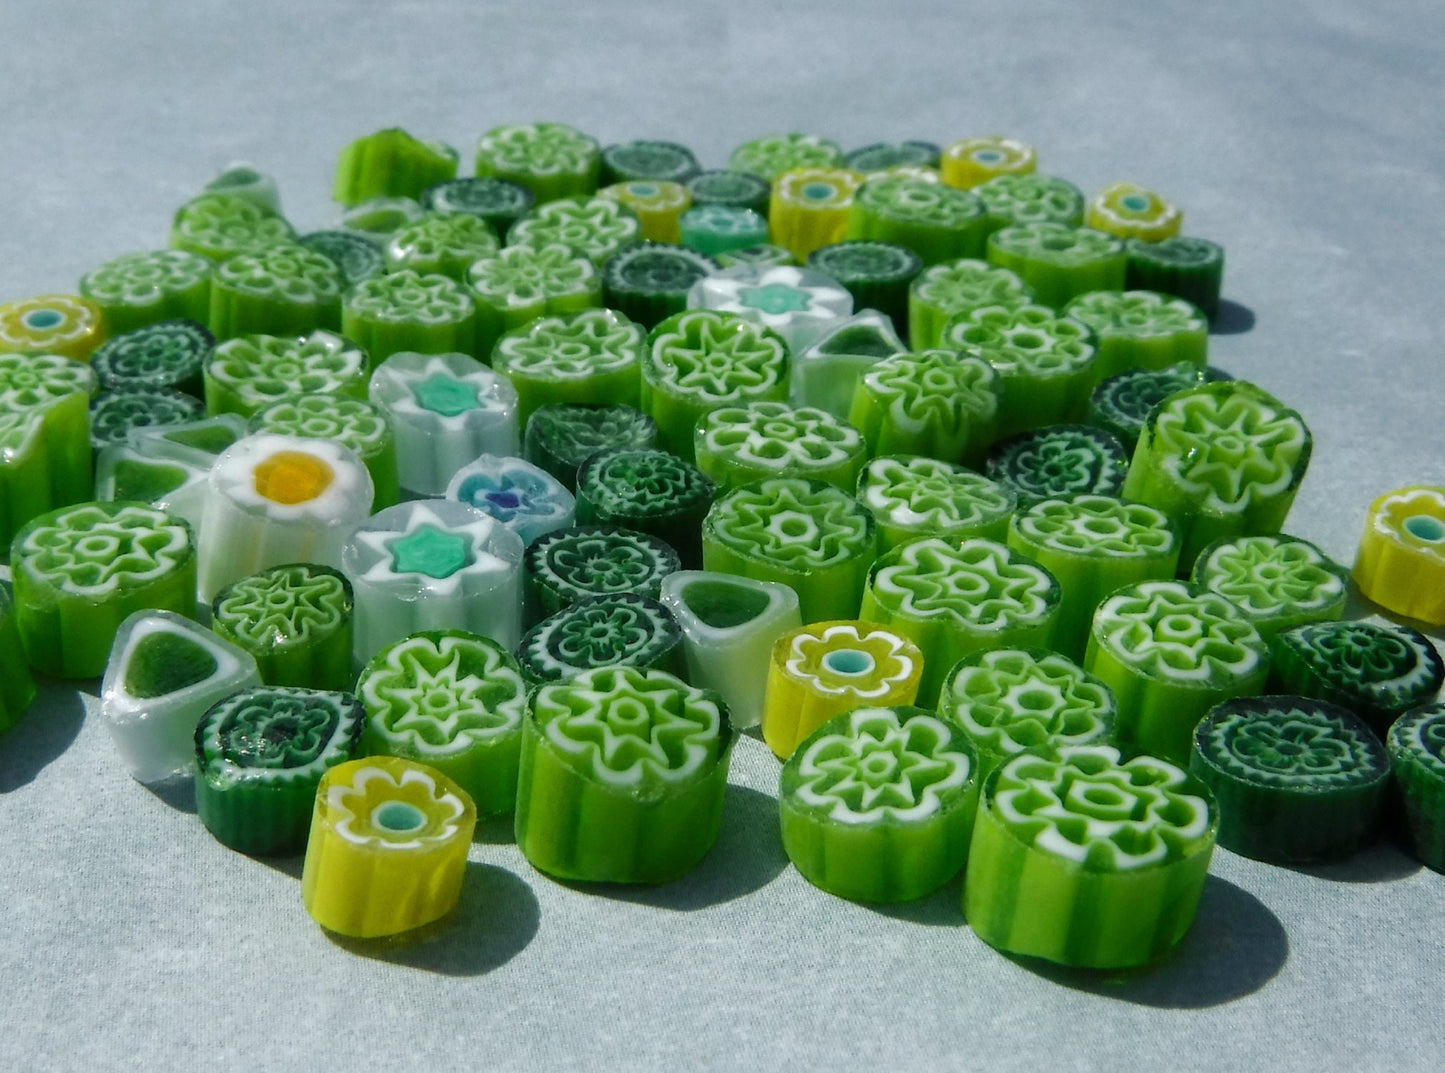 Green Millefiori - 25 grams - Unique Mosaic Glass Tiles - Mix of Different Patterns Shapes and Colors